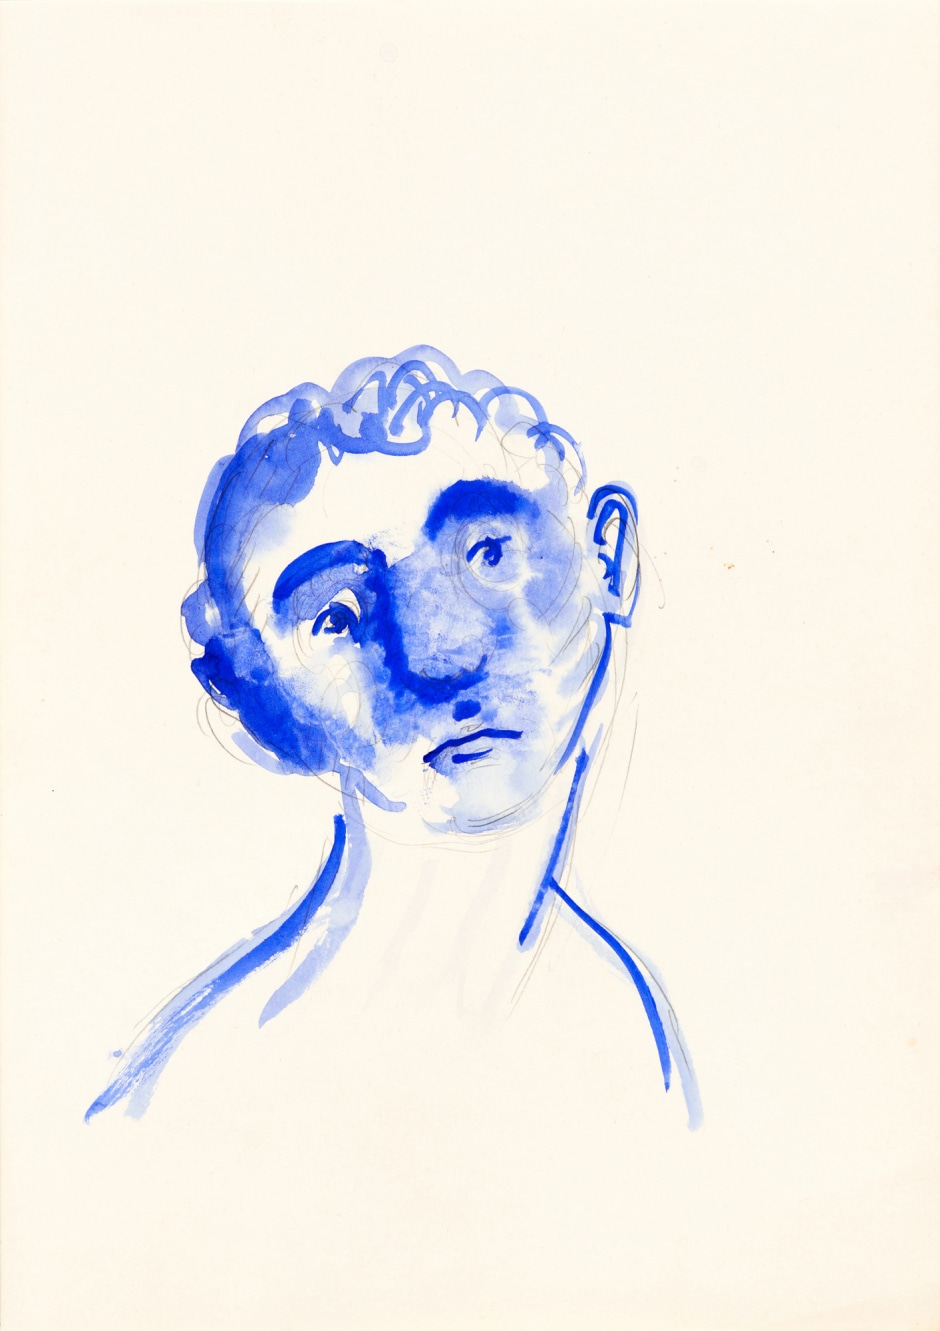 Blueface, 2001  watercolour and pencil on paper  site size: 30 x 21 cm / 11 ¾ x 8 ¼ in frame size: 49 x 40.5 x 2.5 cm / 19 ¼ x 16 x 1 in